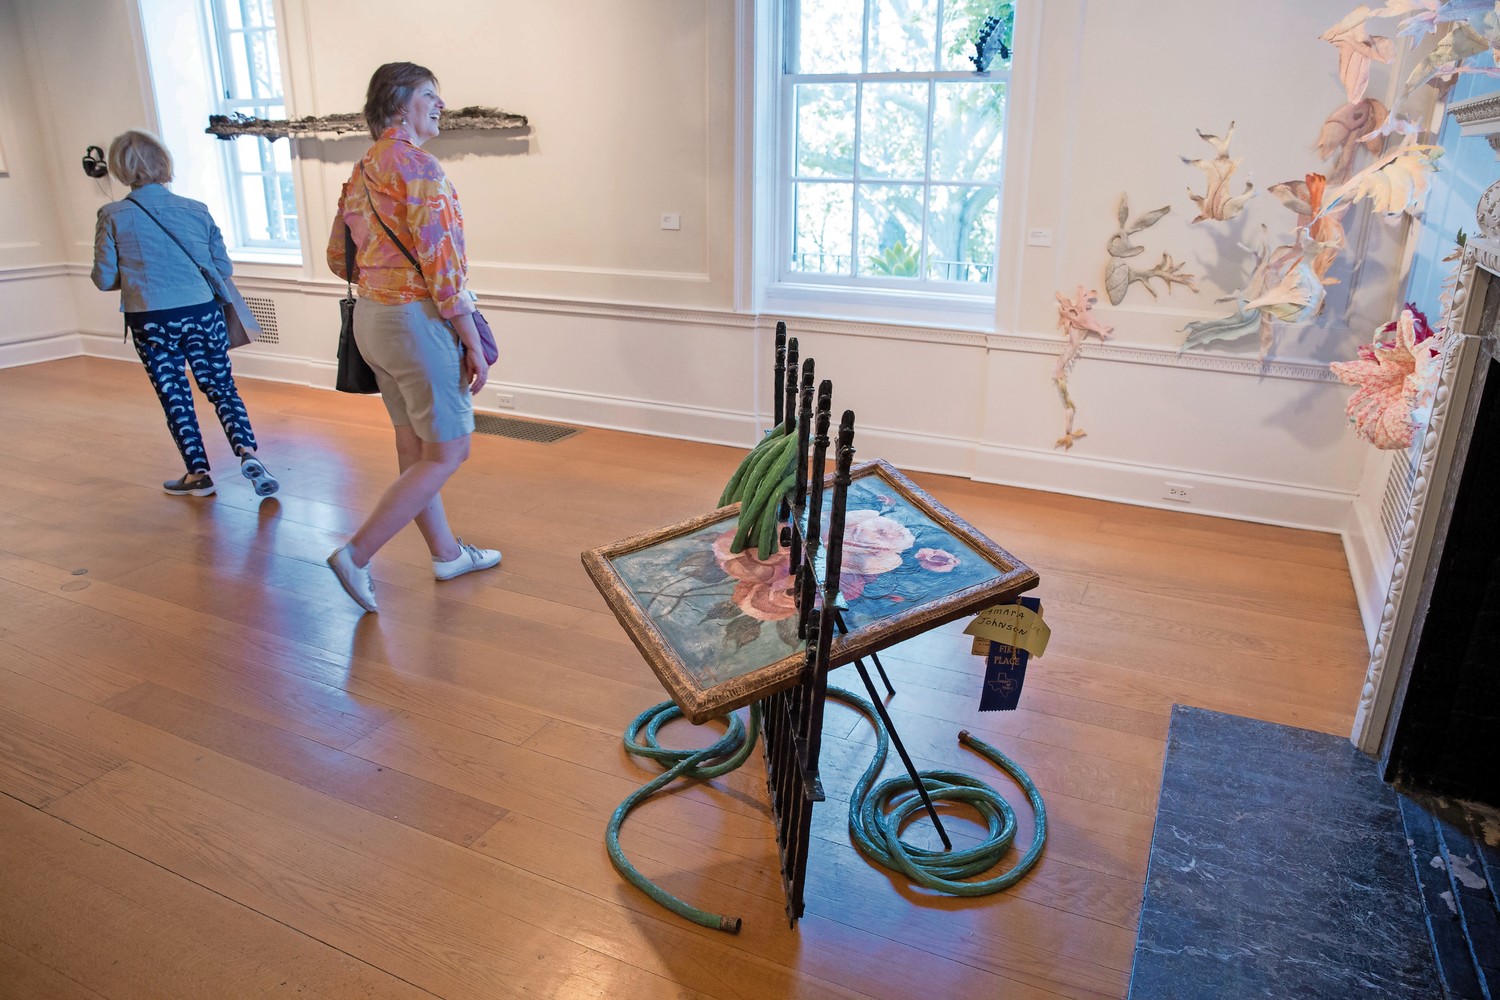 Wave Hill visitors look at works in the Glyndor Gallery. The exhibition, featuring 50 alumni artists, celebrates the 10th anniversary of the Sunroom Project Space, which invites local artists to create work related to Wave Hill. The exhibit, ‘Call & Response’ runs through Dec. 3.